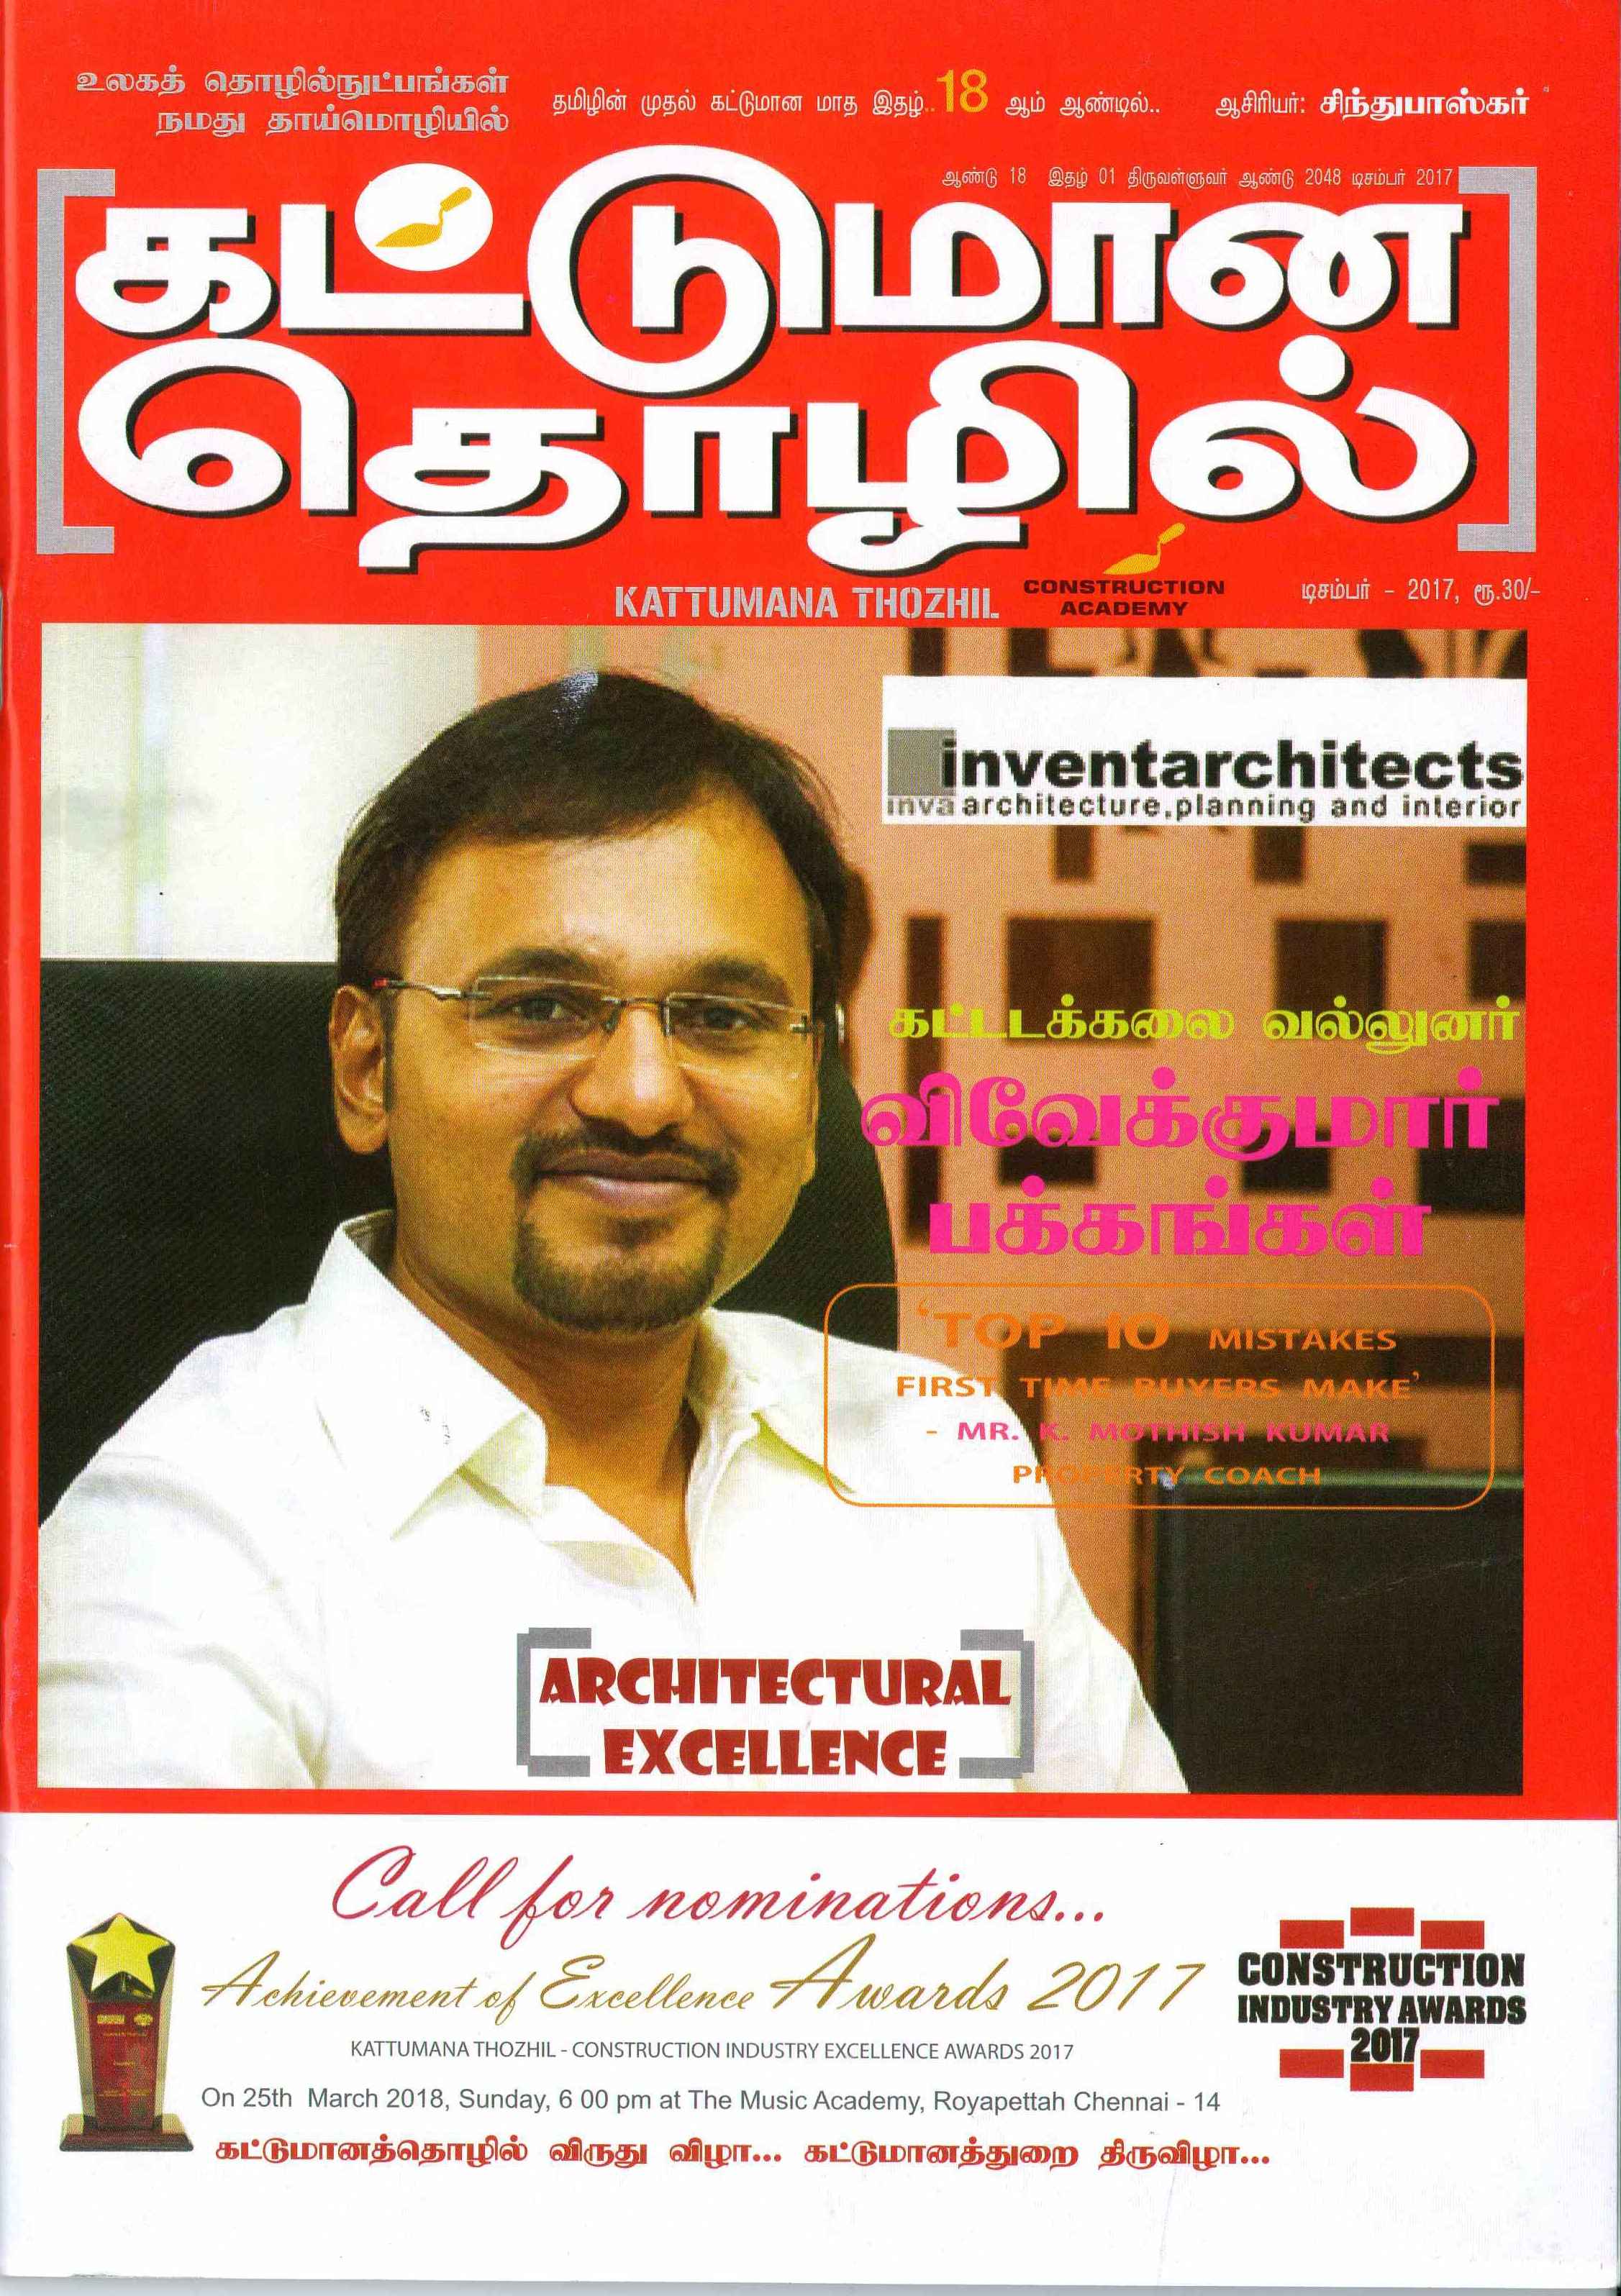 Architectural excellence award by Kattumana Thozhil